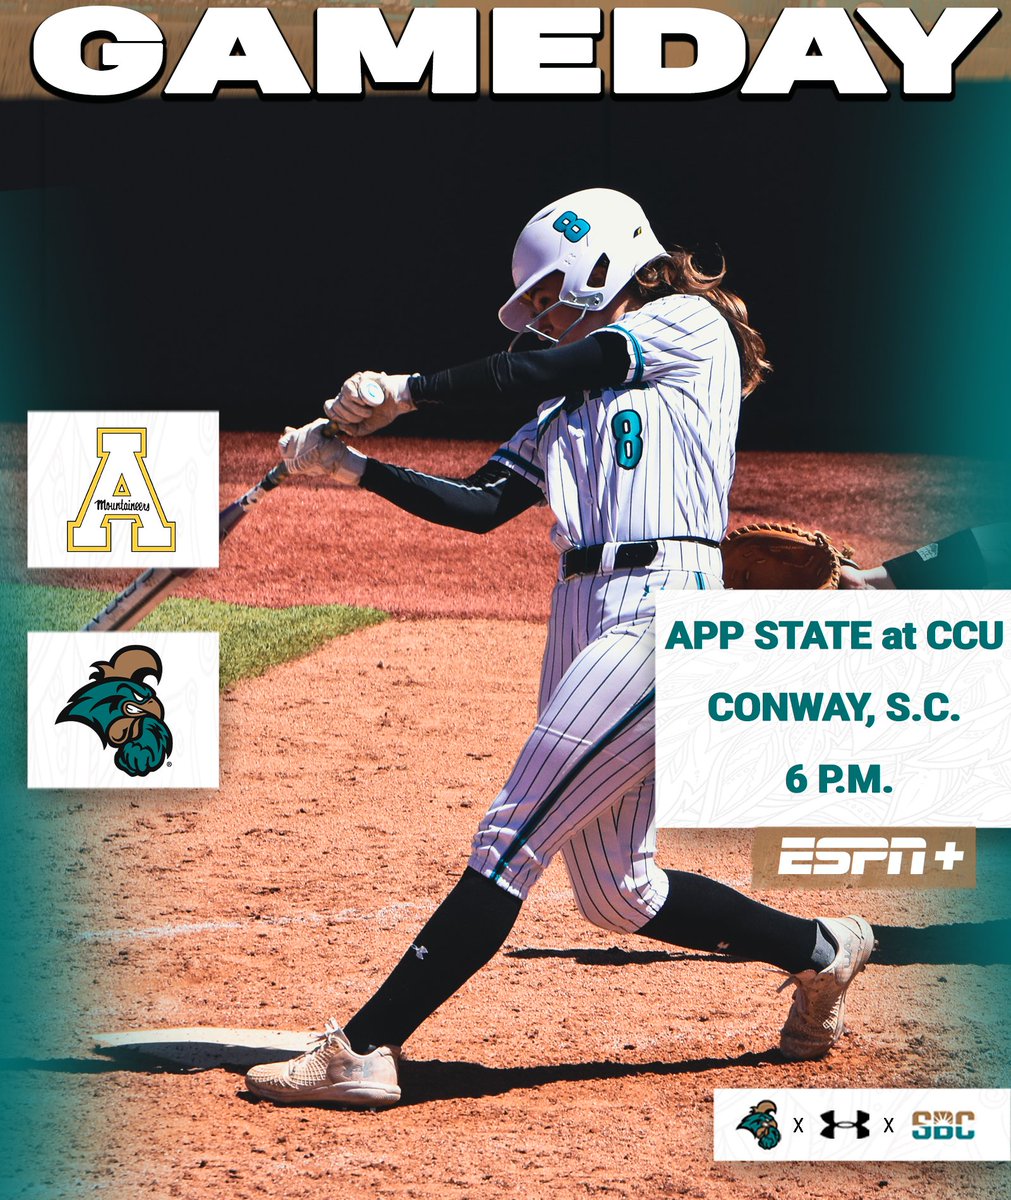 GAMEDAY🥎 Location: Conway, S.C. Opponent: App State Time: 6 p.m. ET #ChantsUp #TEALNATION